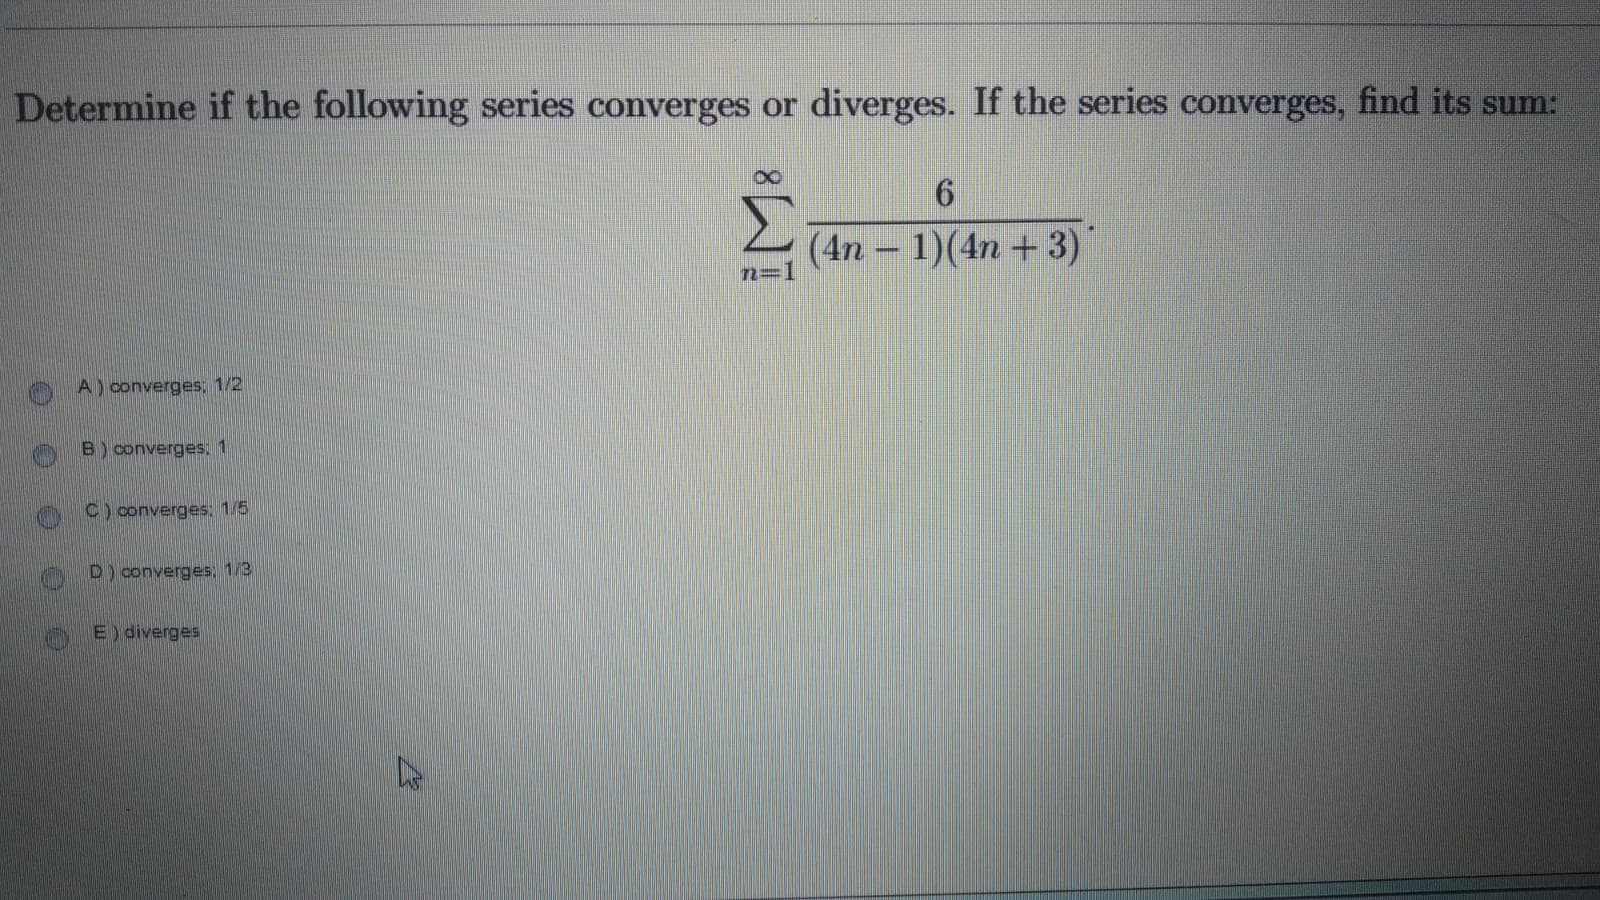 Determine if the following series converges or diverges. If the series converges, find its sum:
Σ
(4n - 1)(4n + 3)
O A) converges; 1/2
B) converges,1
C) converges: 1/5
D) converges: 1/3
E) diverges
